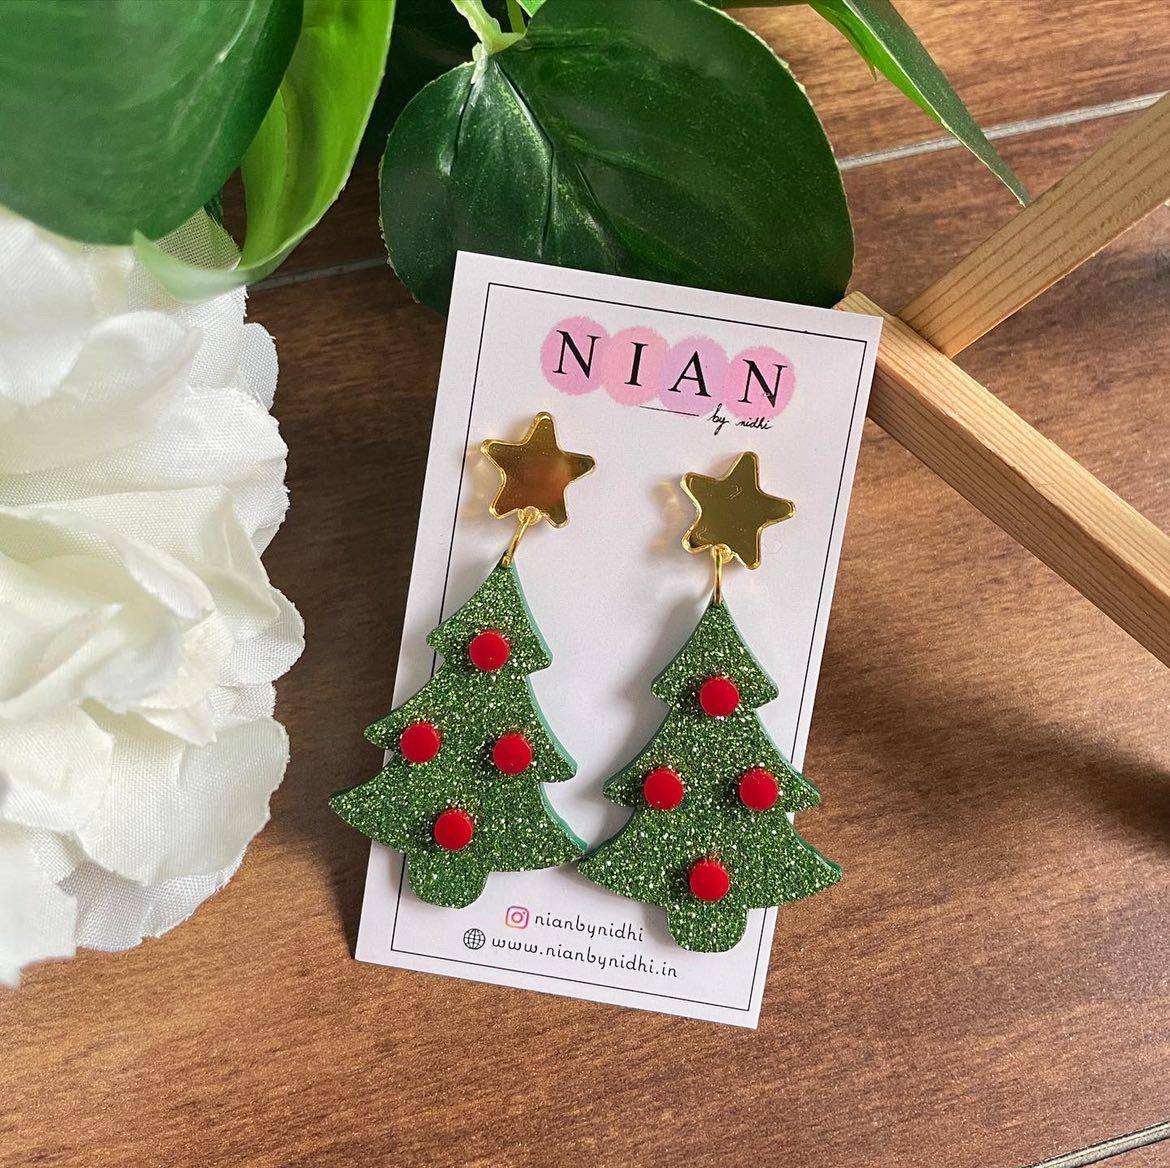 X-Mas Tree Earrings - Shimmer Green and Red - Nian by Nidhi - placed in a white and brown background, along with a Nian by Nidhi Earring Card